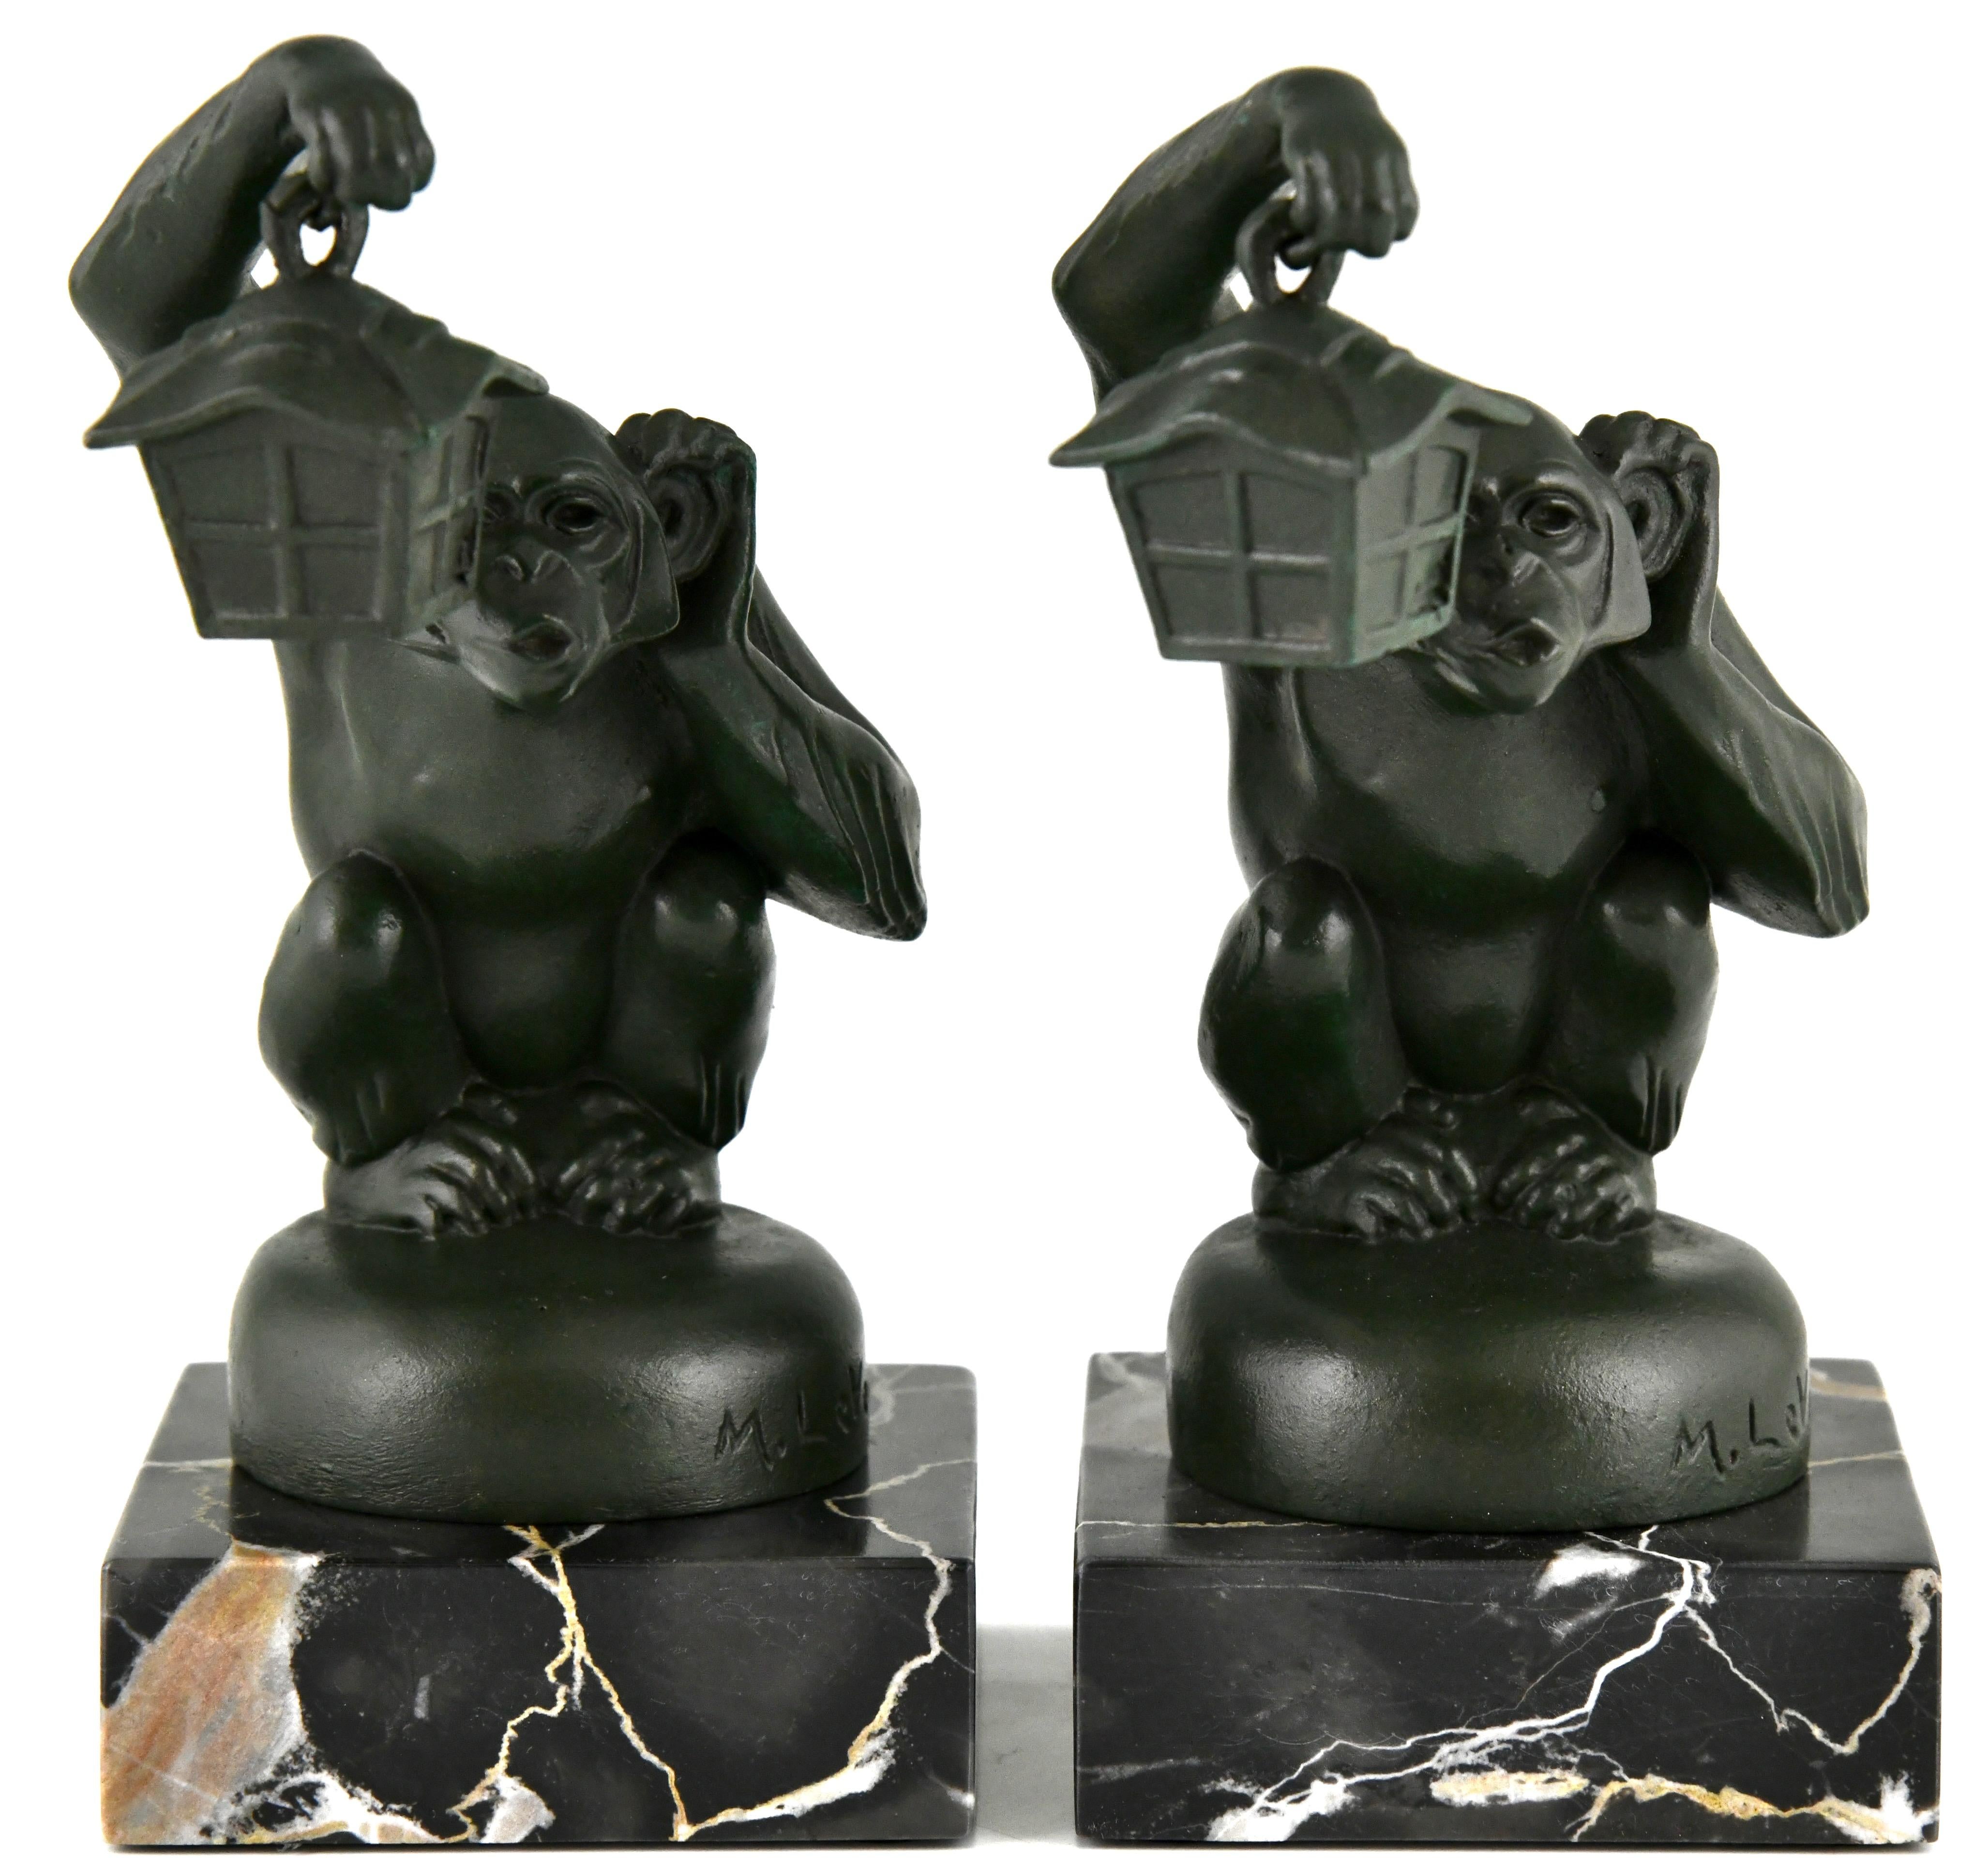 French Art Deco Bookends Monkey with Lantern by Max Le Verrier 1925 For Sale